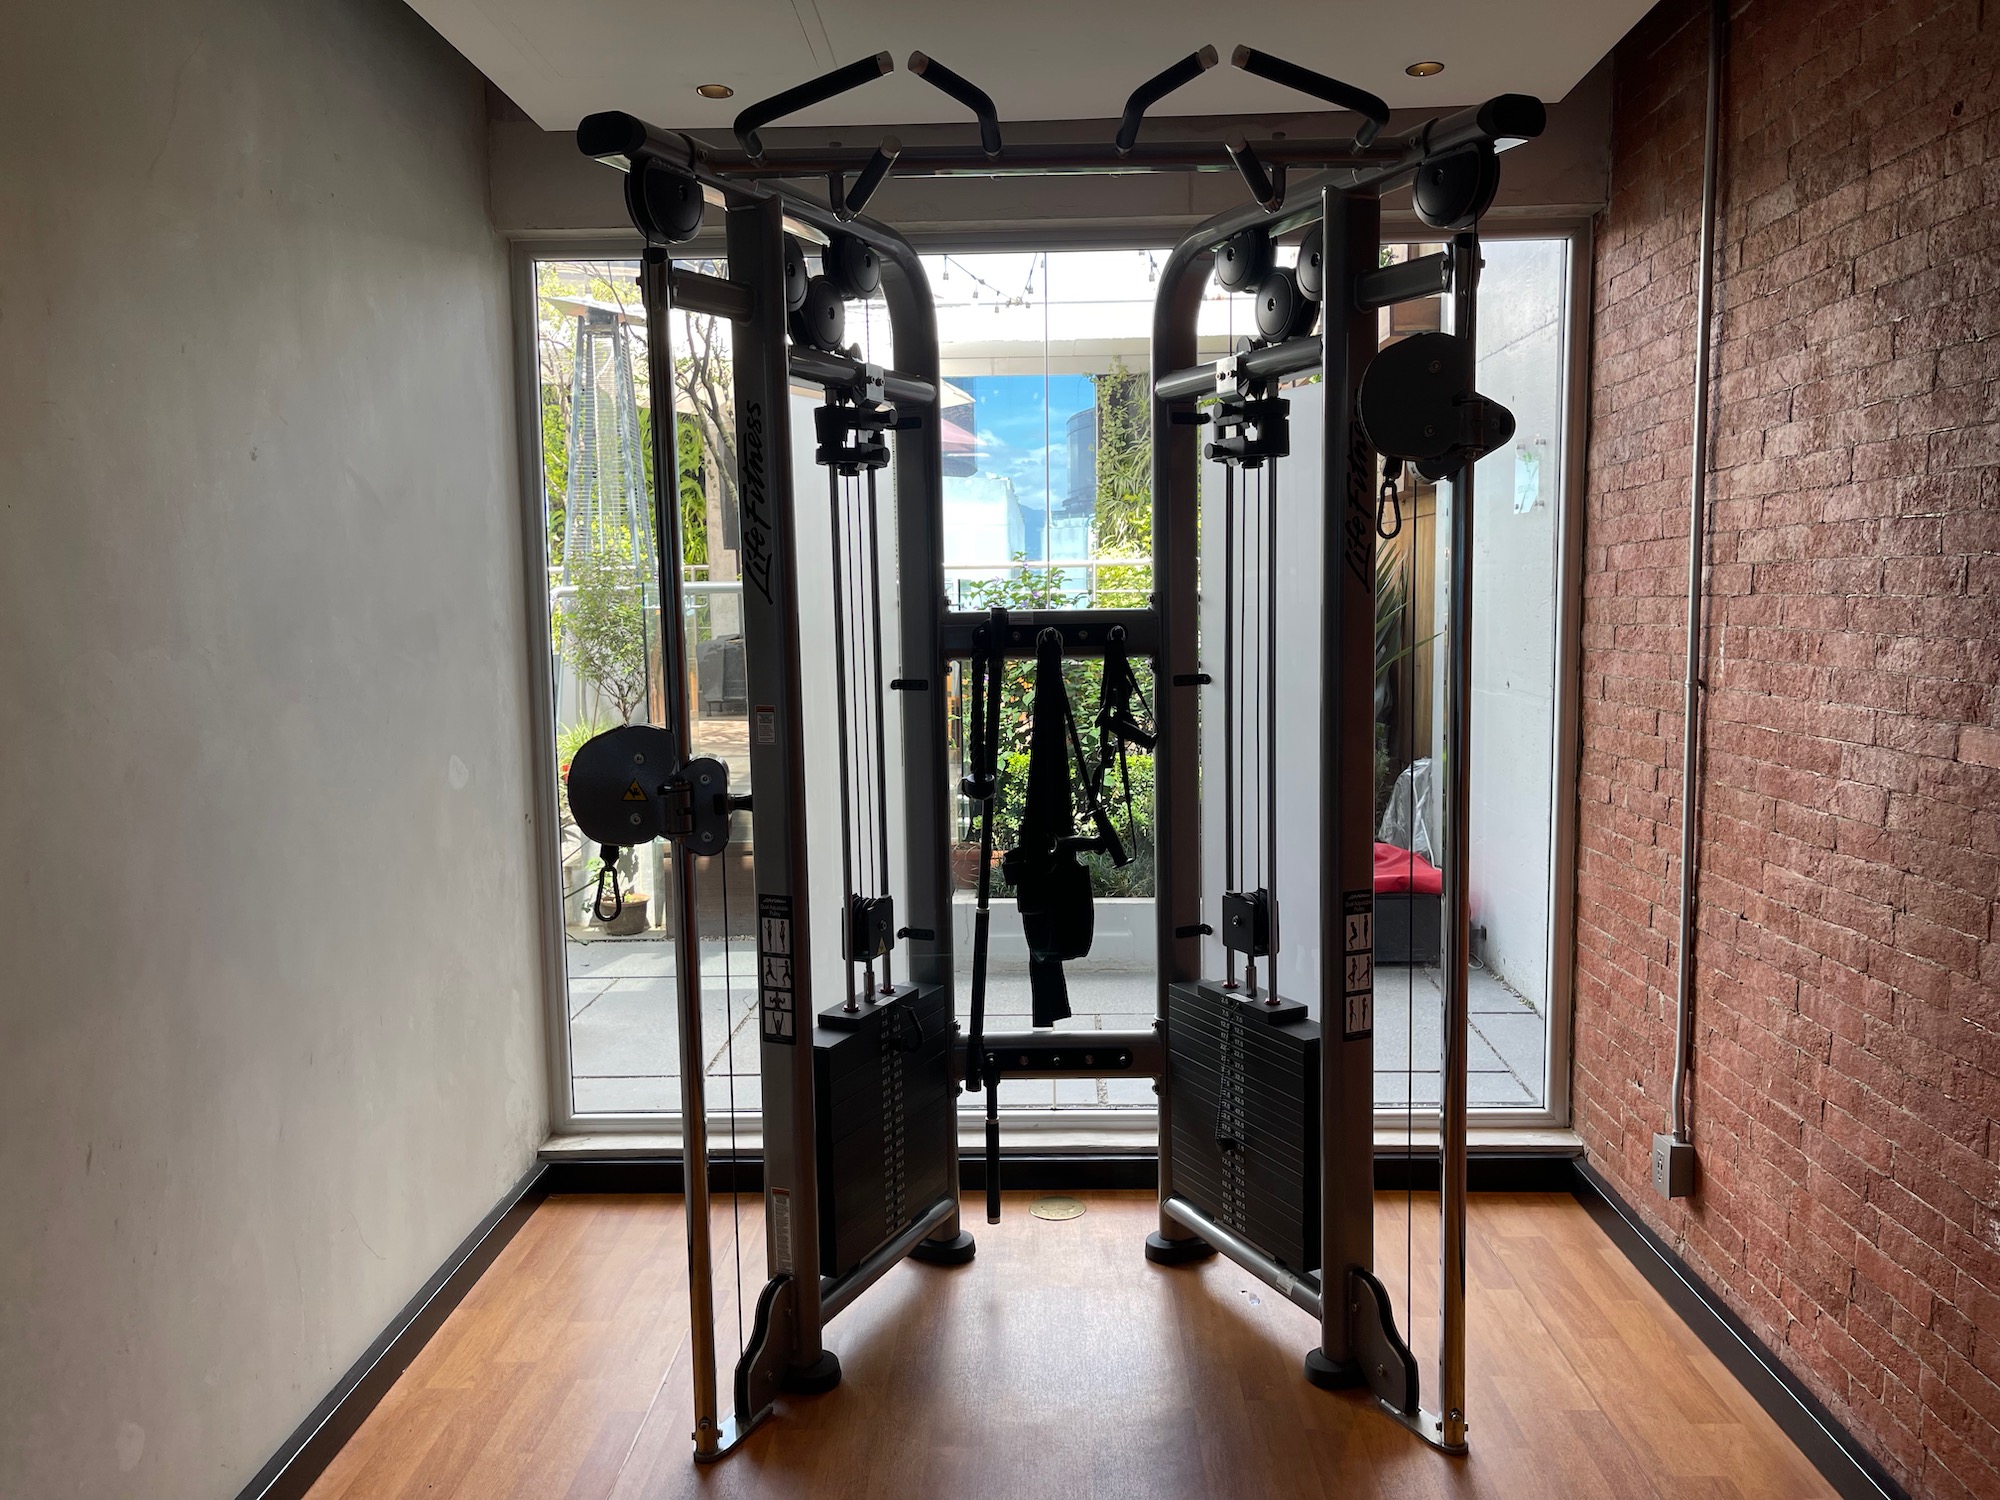 a gym equipment in a room